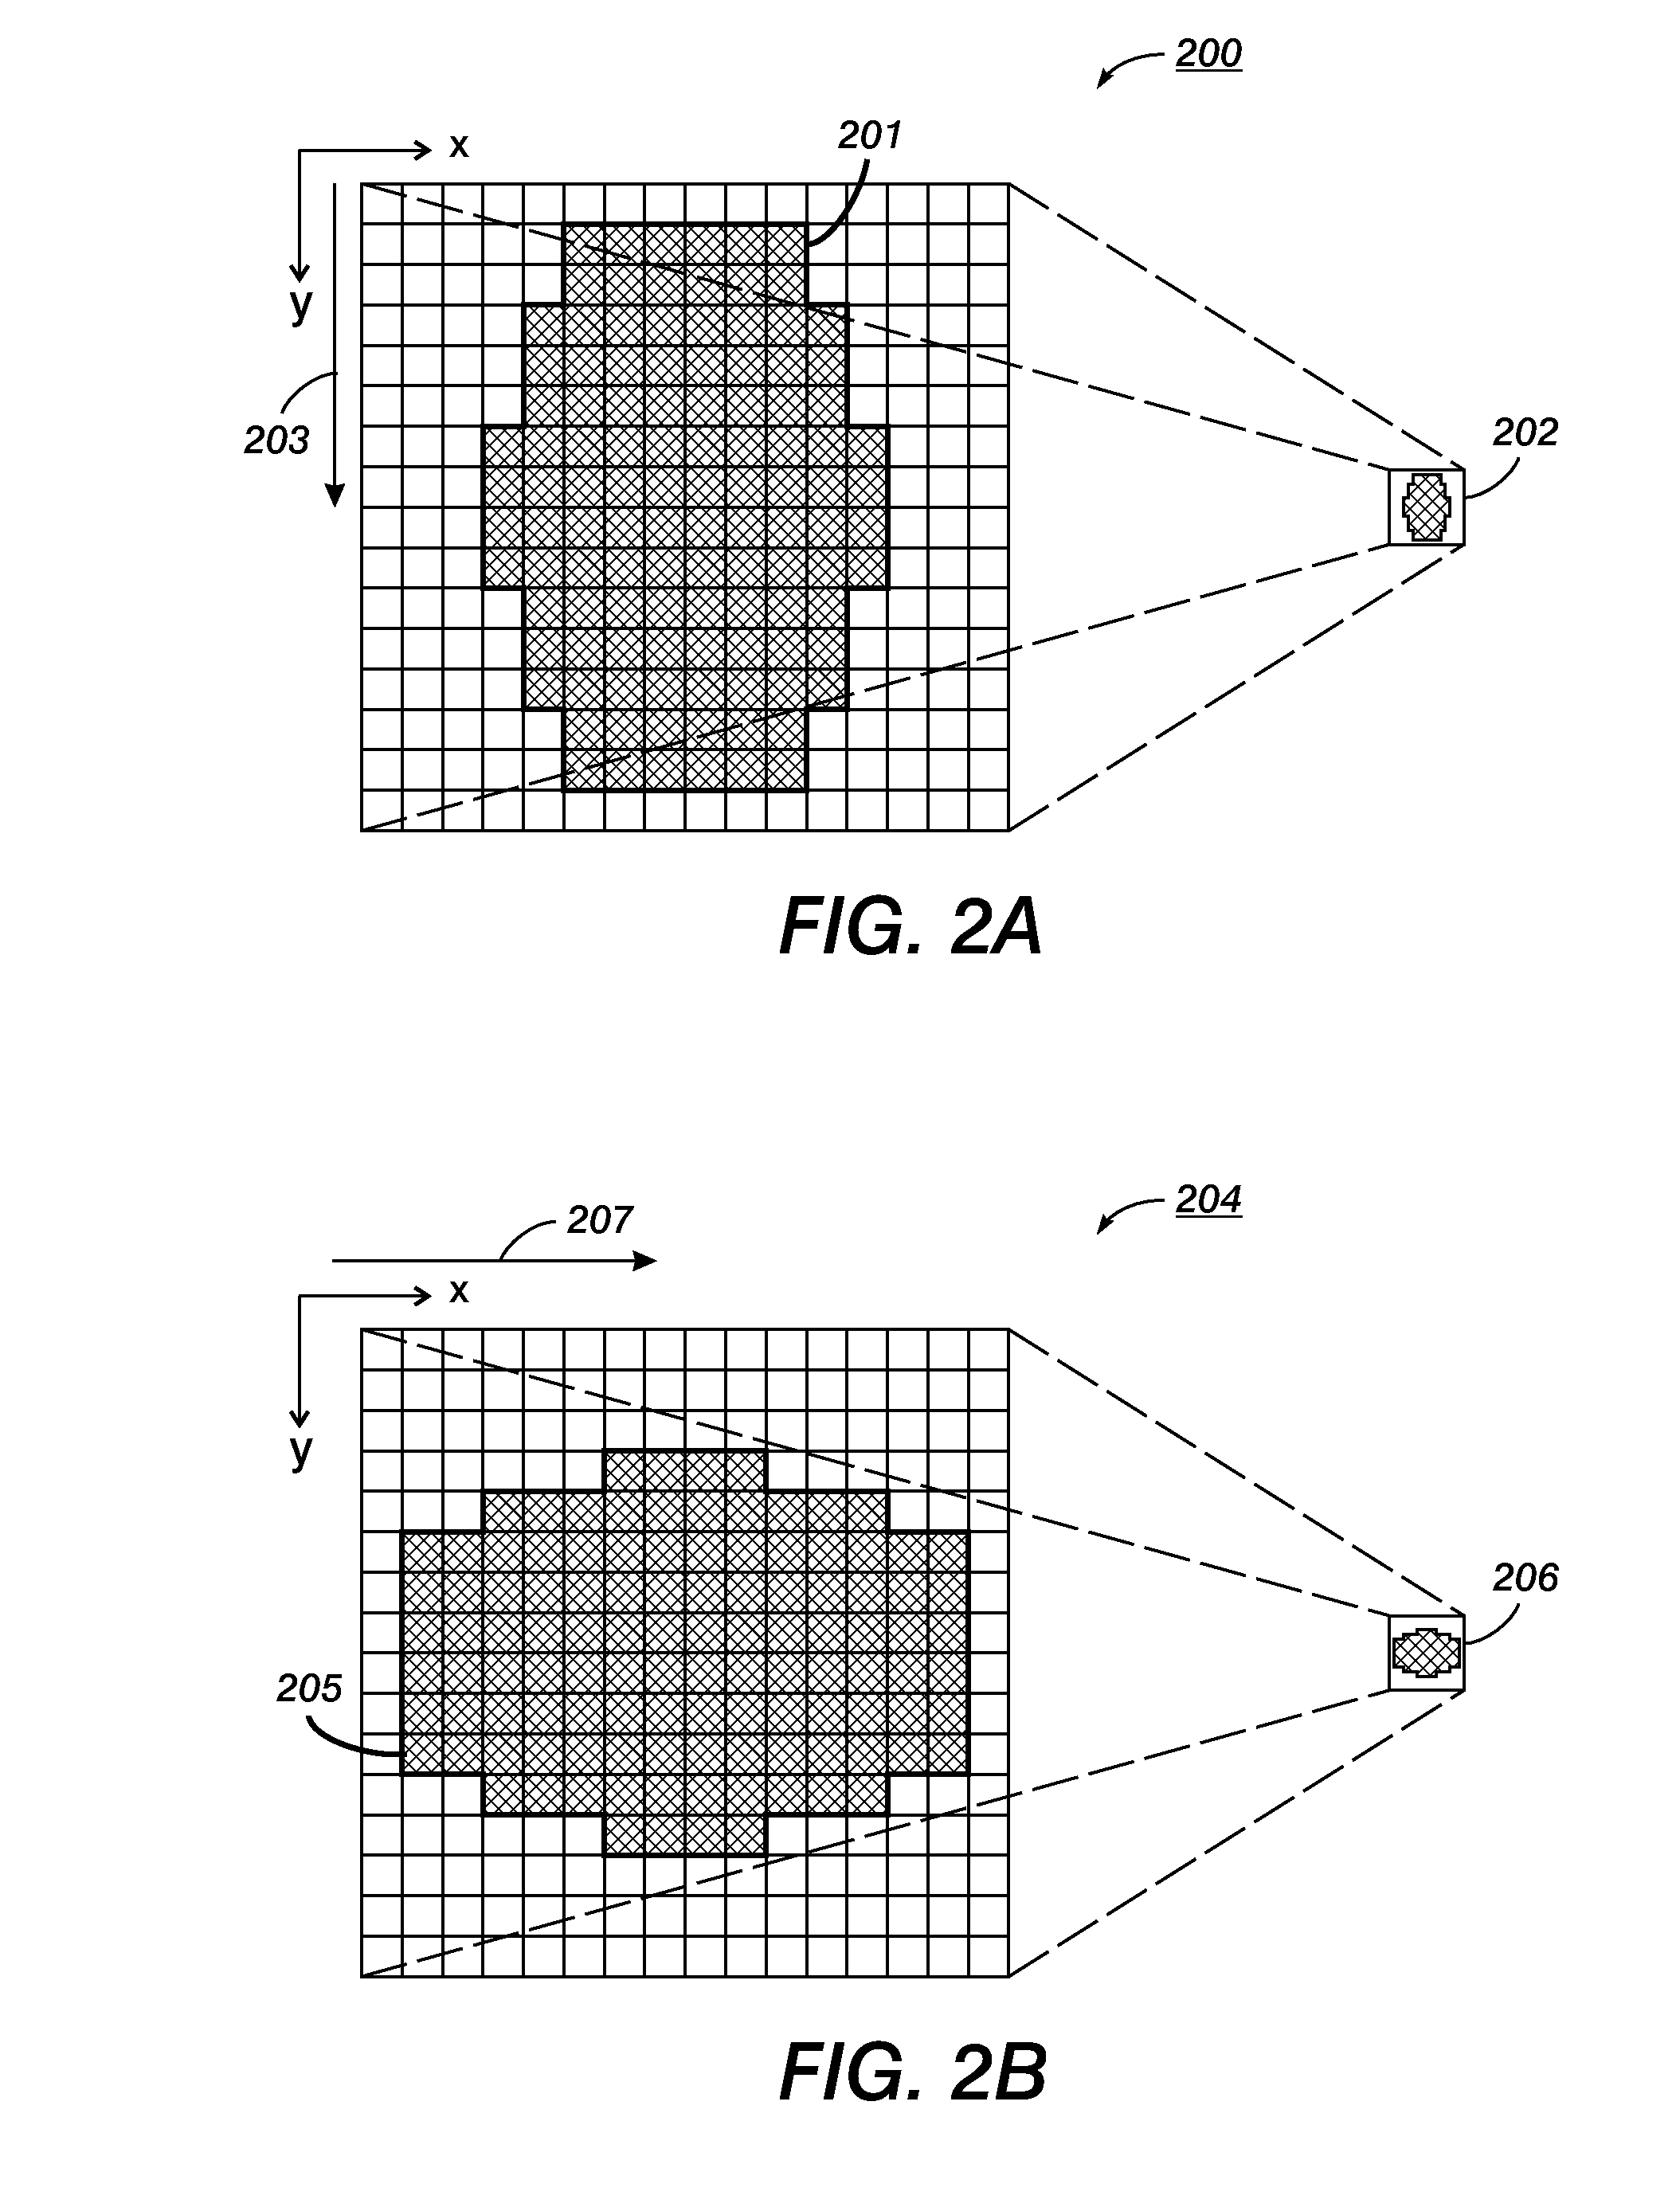 Method for encoding and decoding data in a color barcode pattern